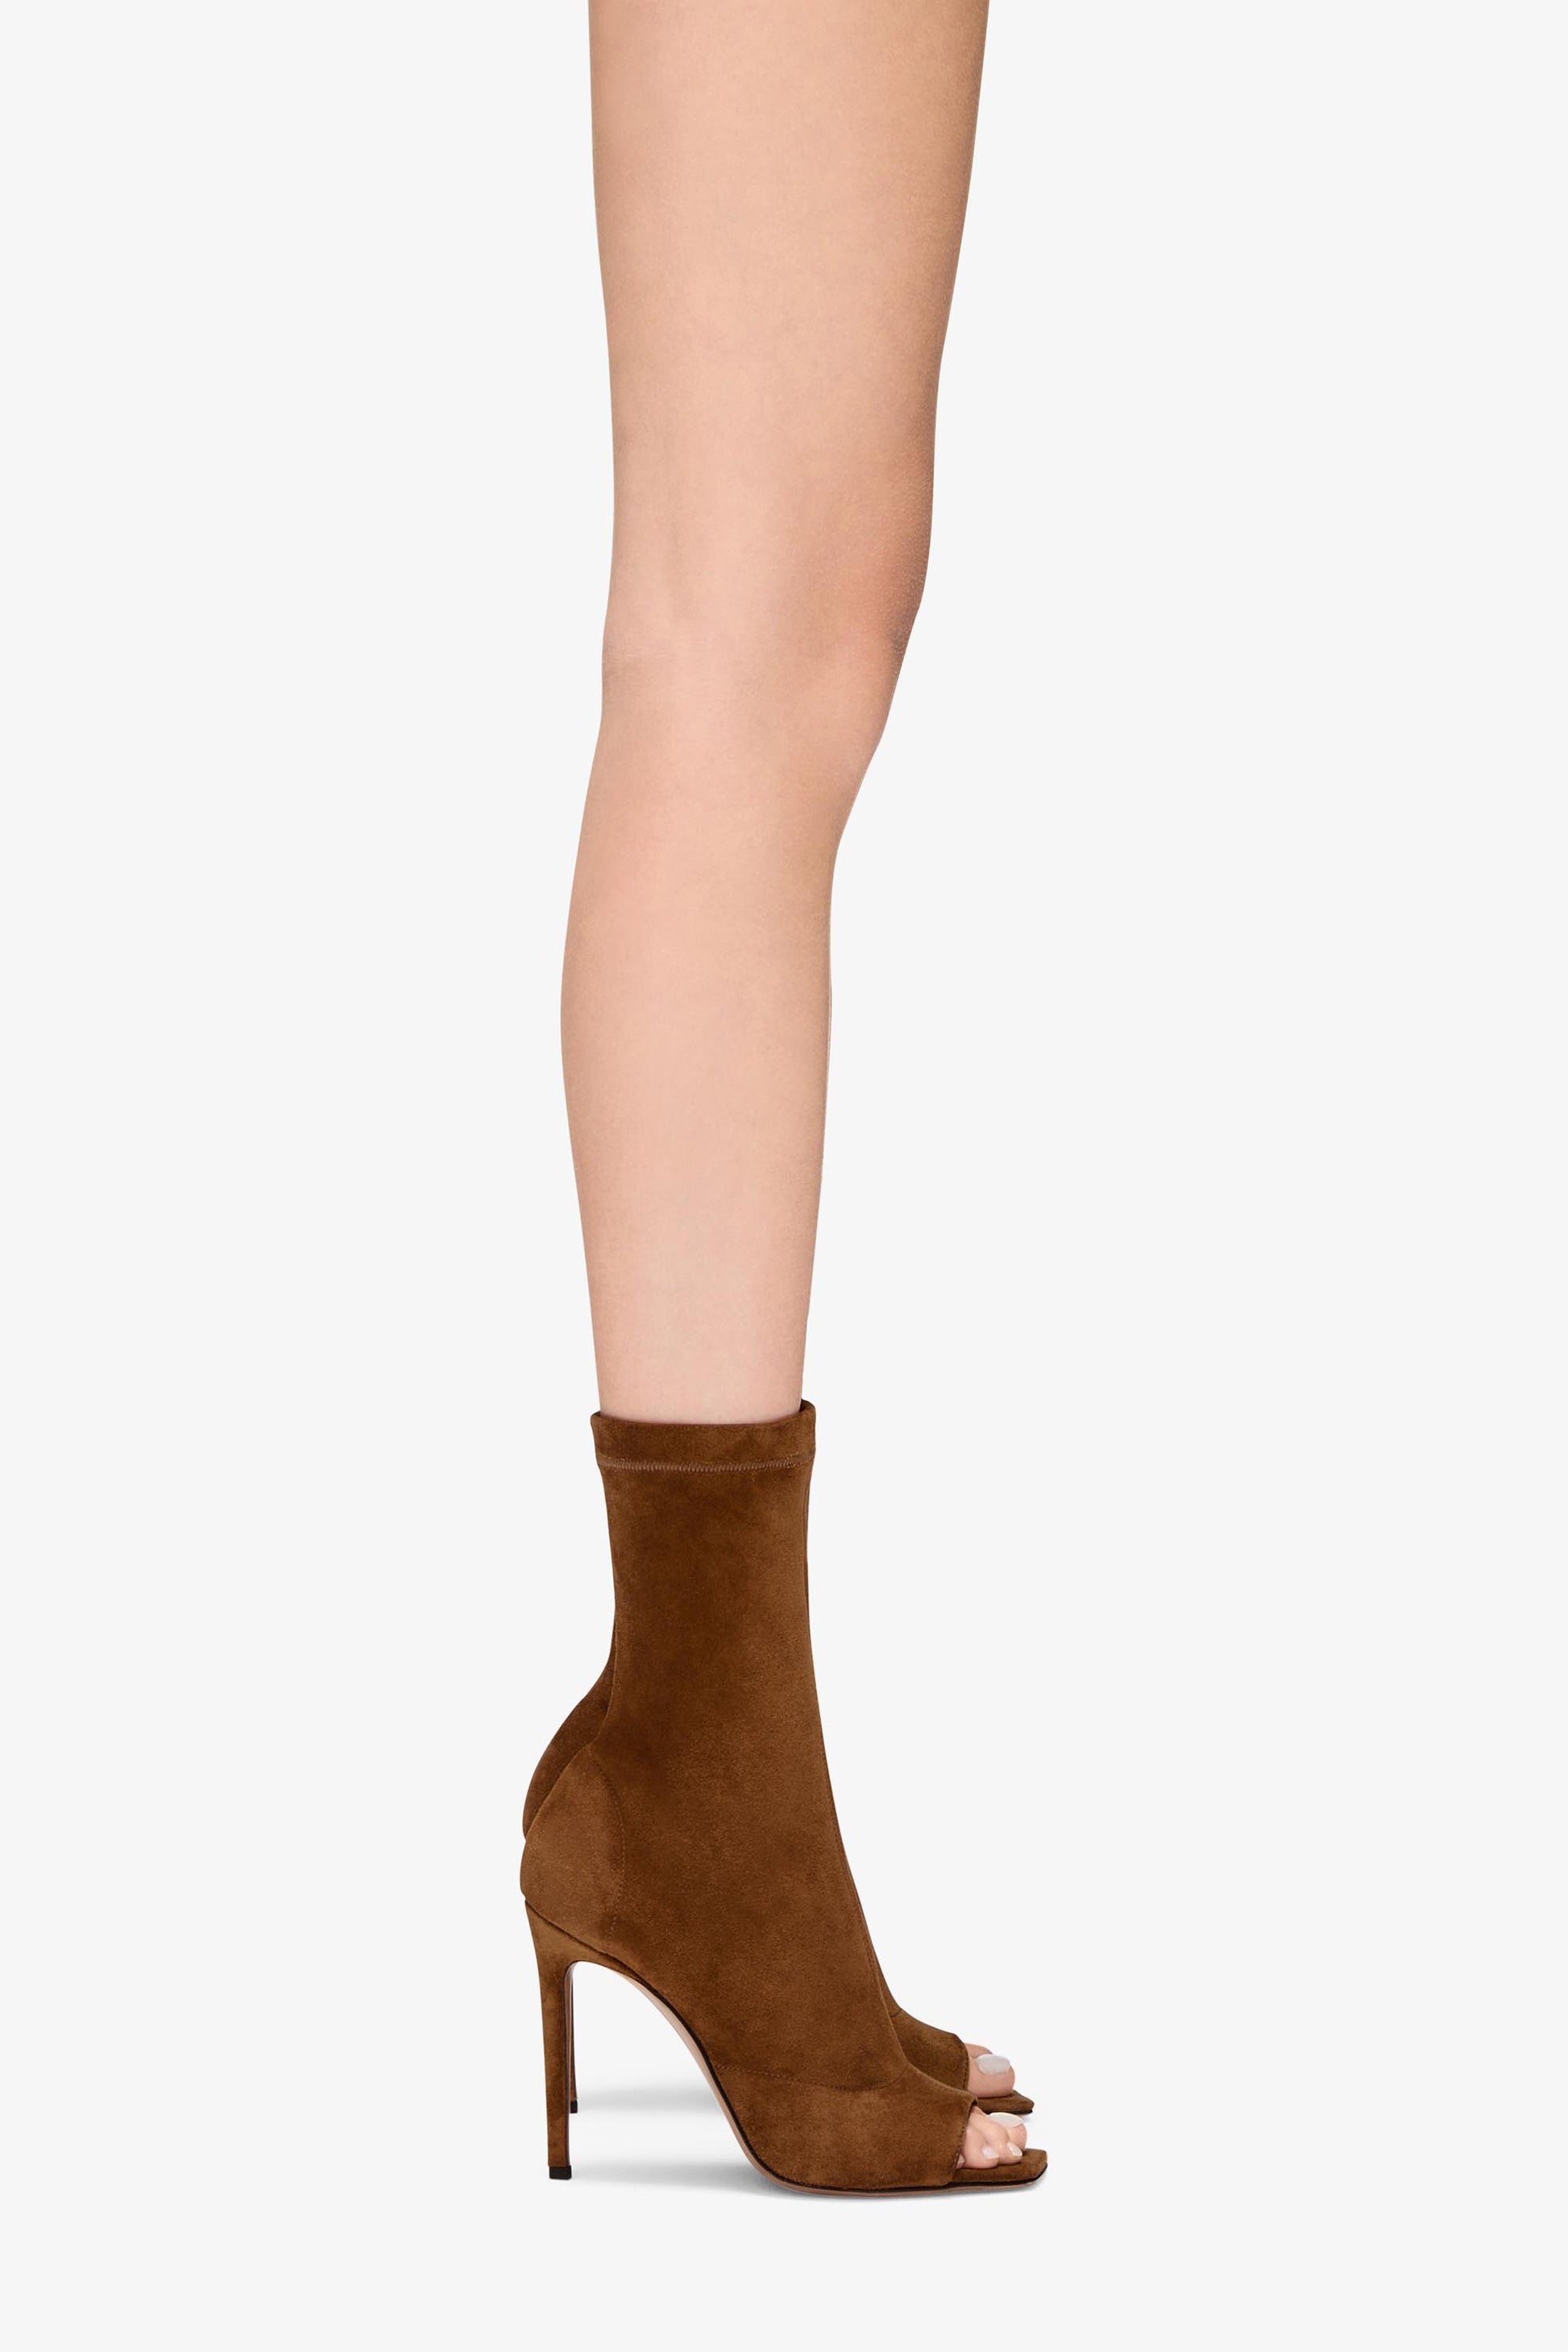 Rhum stretch suede ankle boot - Product worn